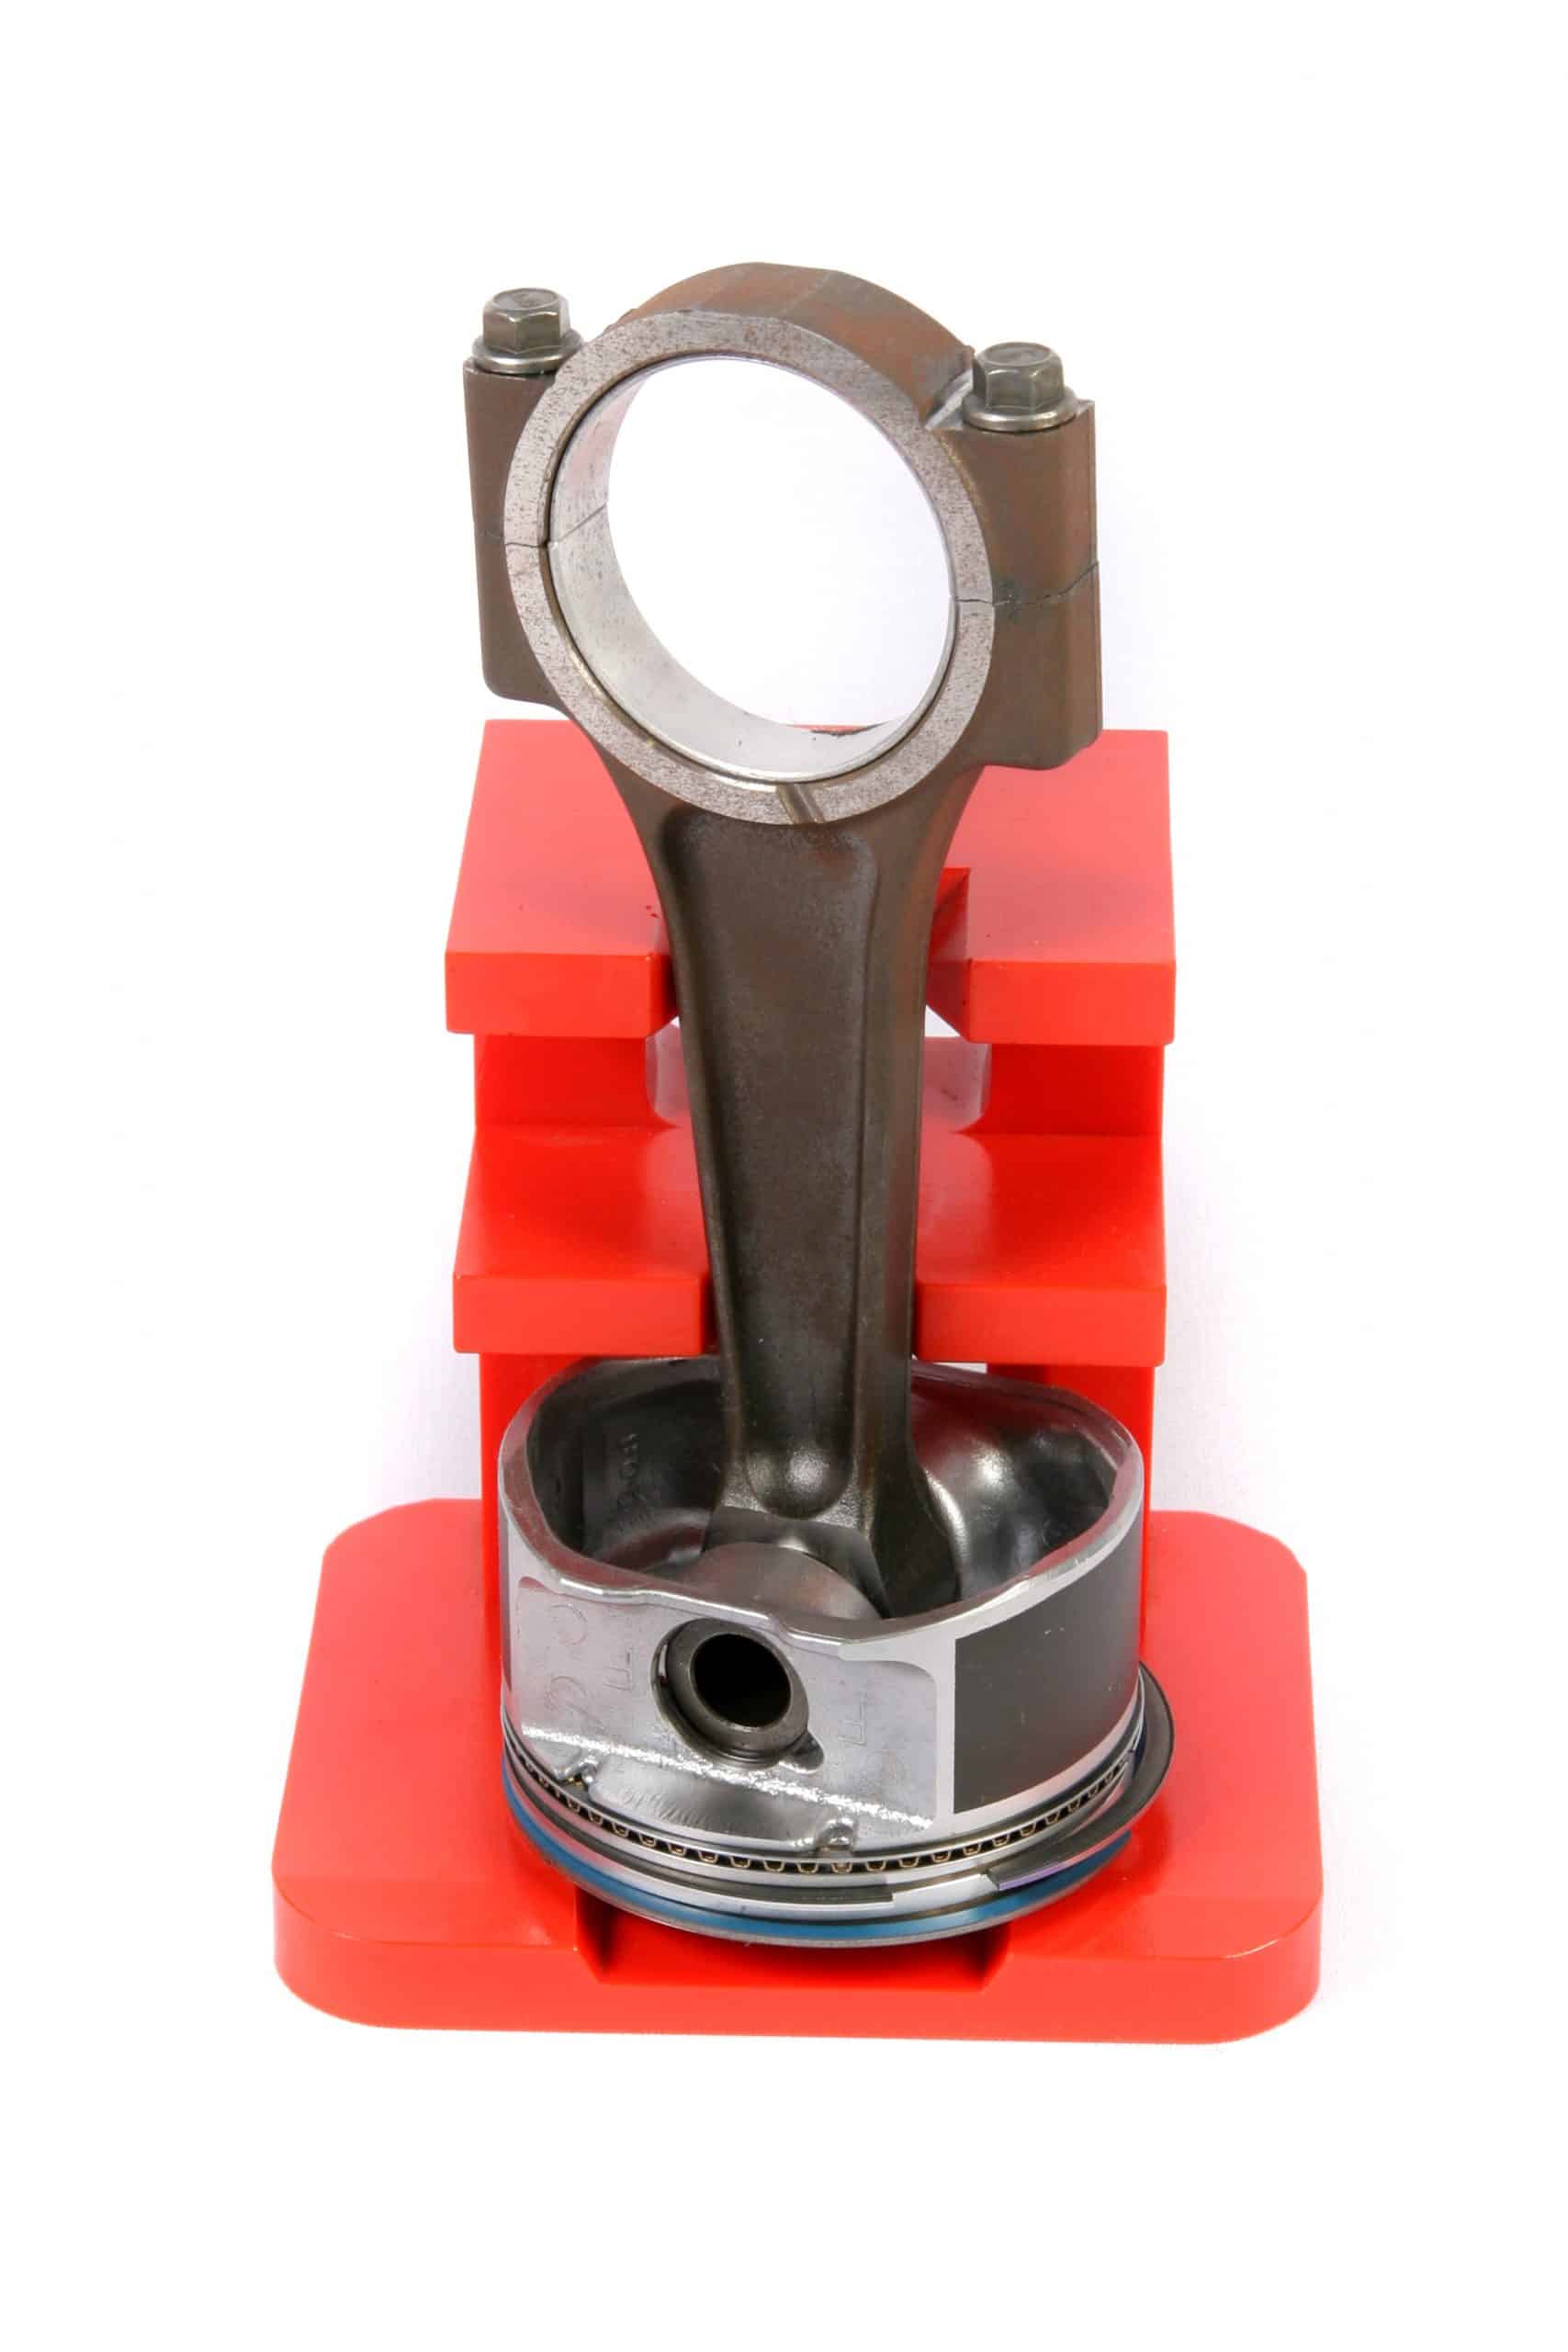 Polyurethane transport fixture for mustang piston assembly.